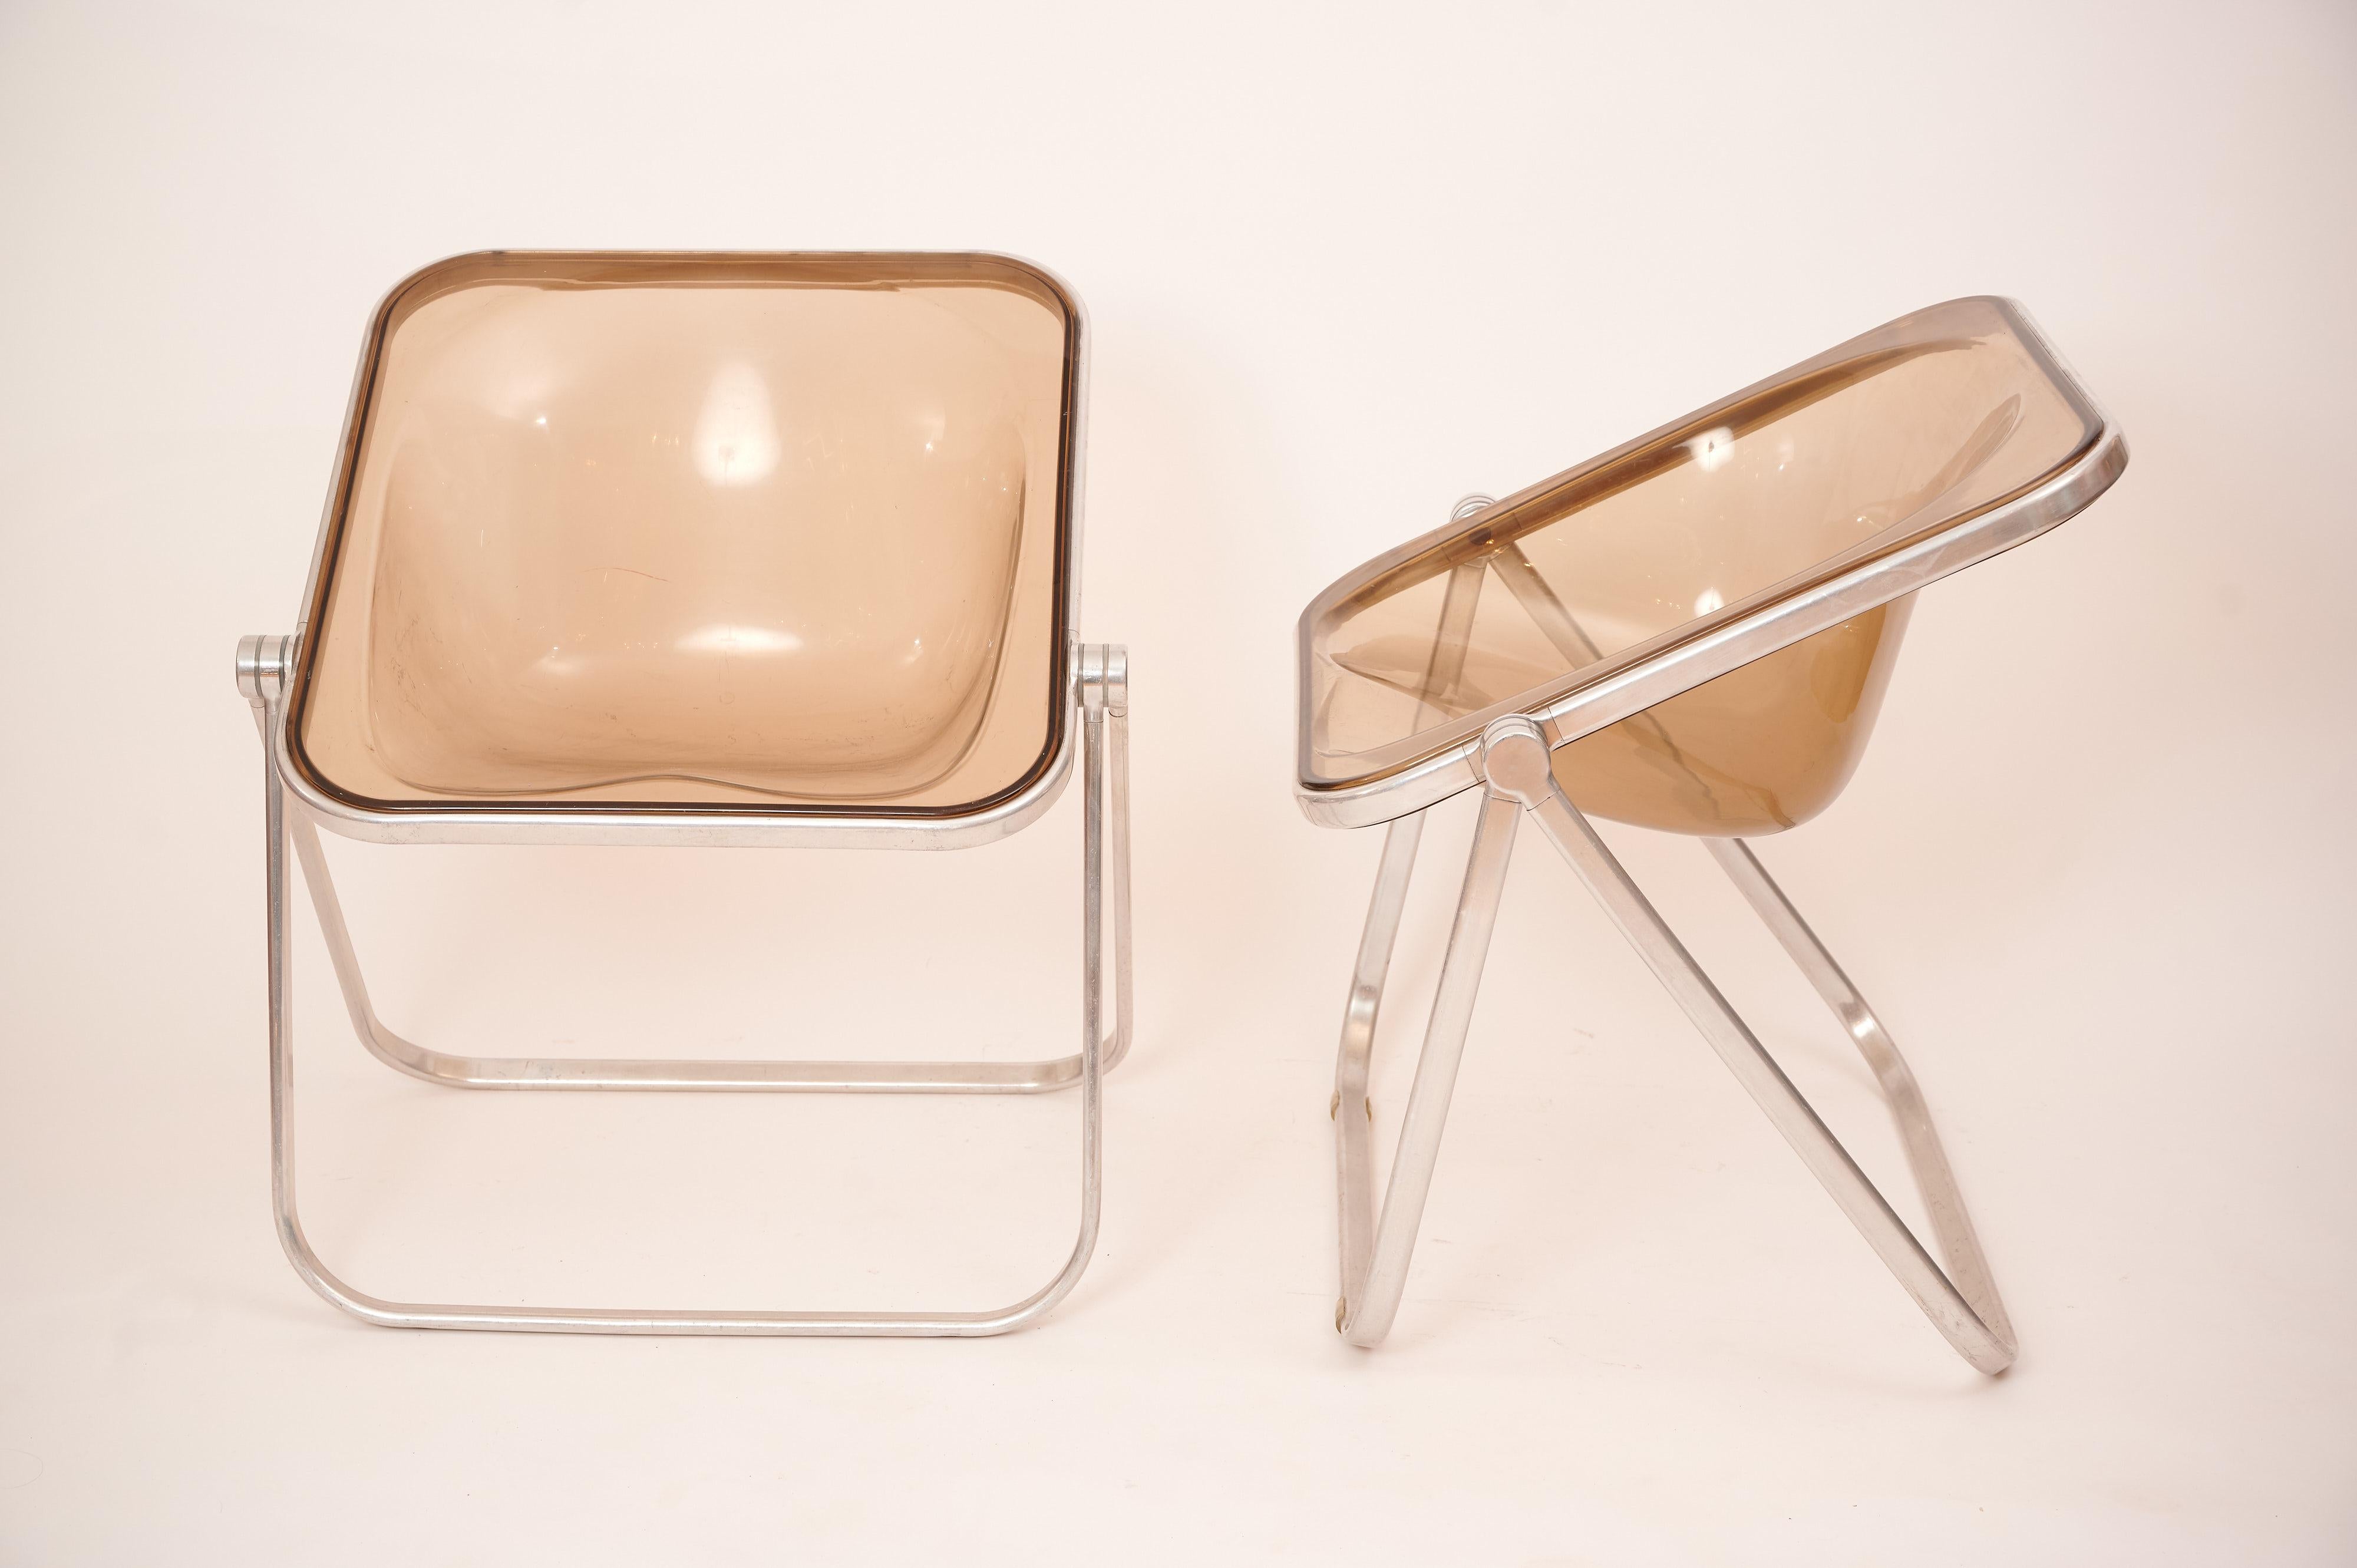 Plona chairs in a rare beige smoked acrylic. 

